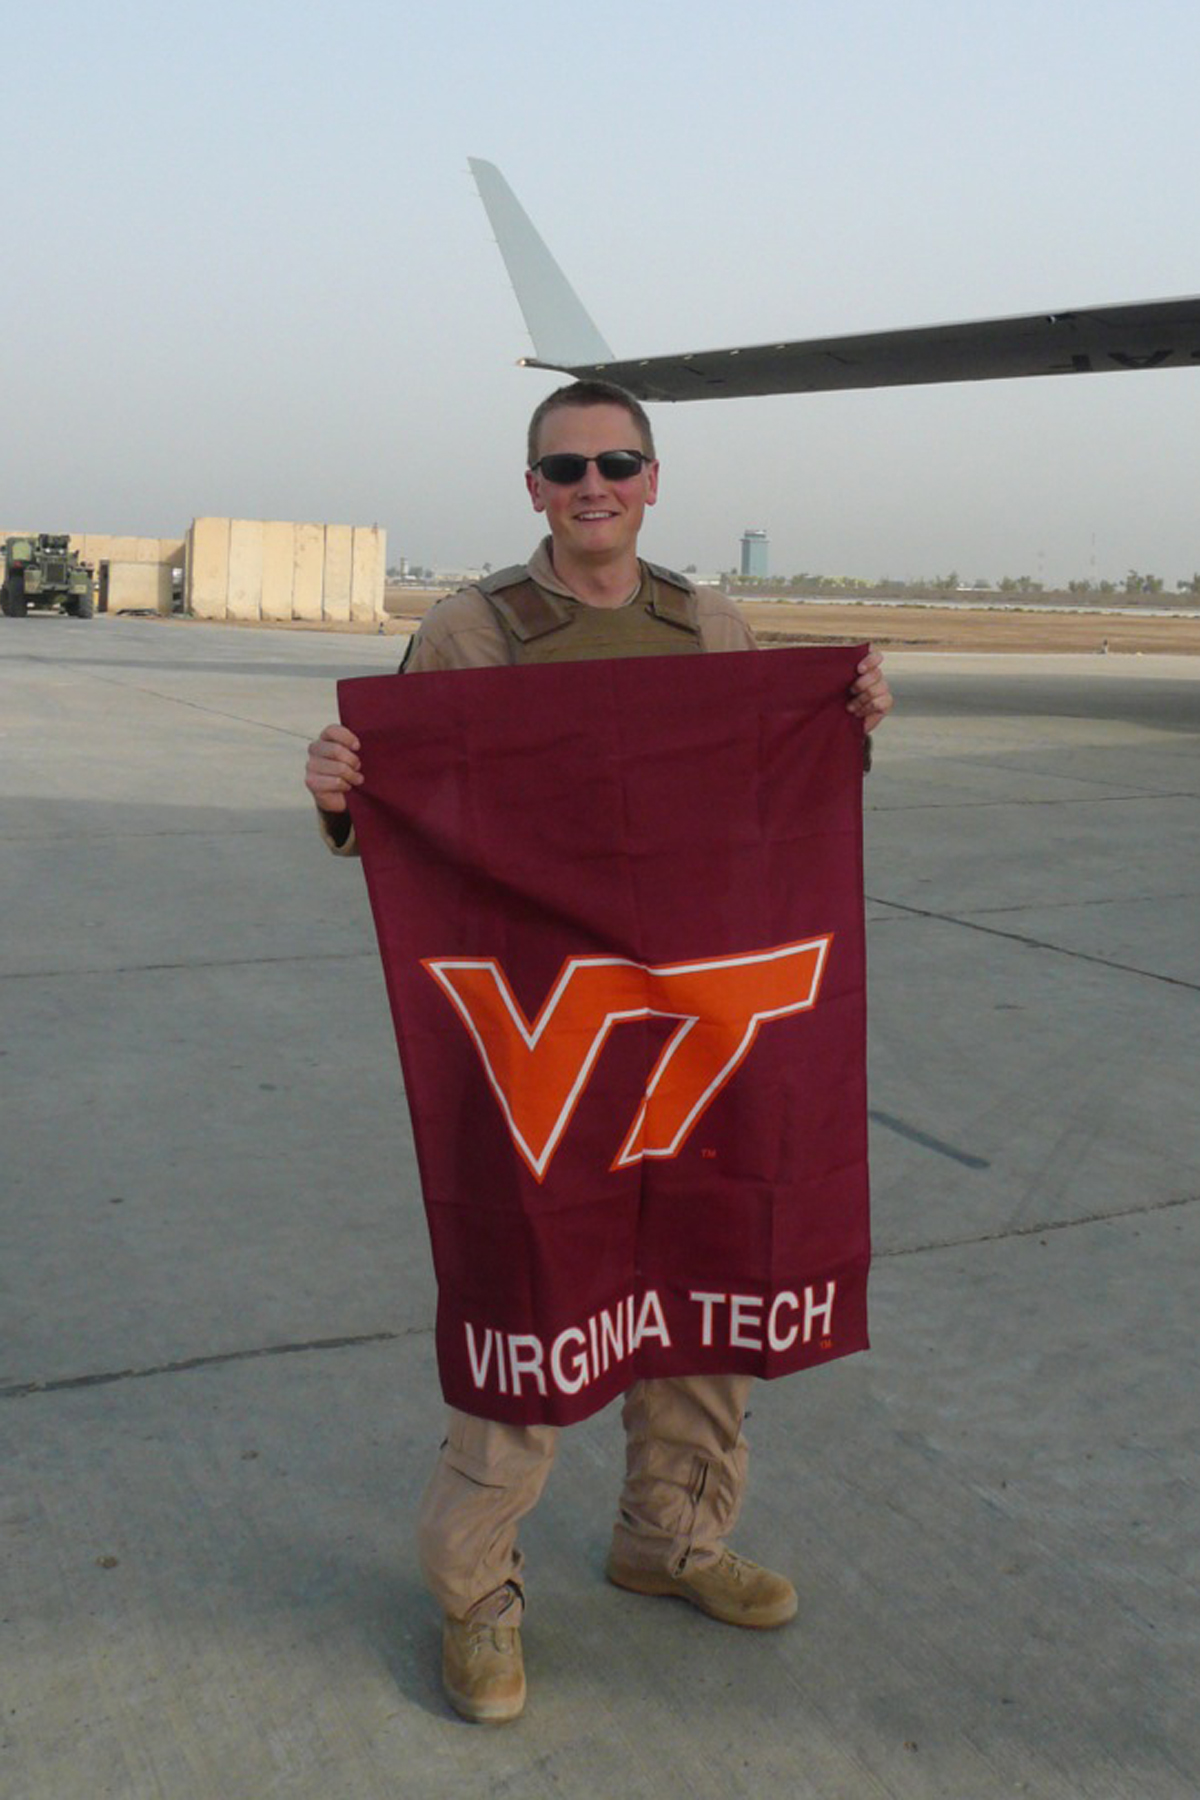 Capt. Timothy Goodwillie, U.S. Air Force, Virginia Tech Corps of Cadets Class of 2005 who is currently deployed to Southwest Asia